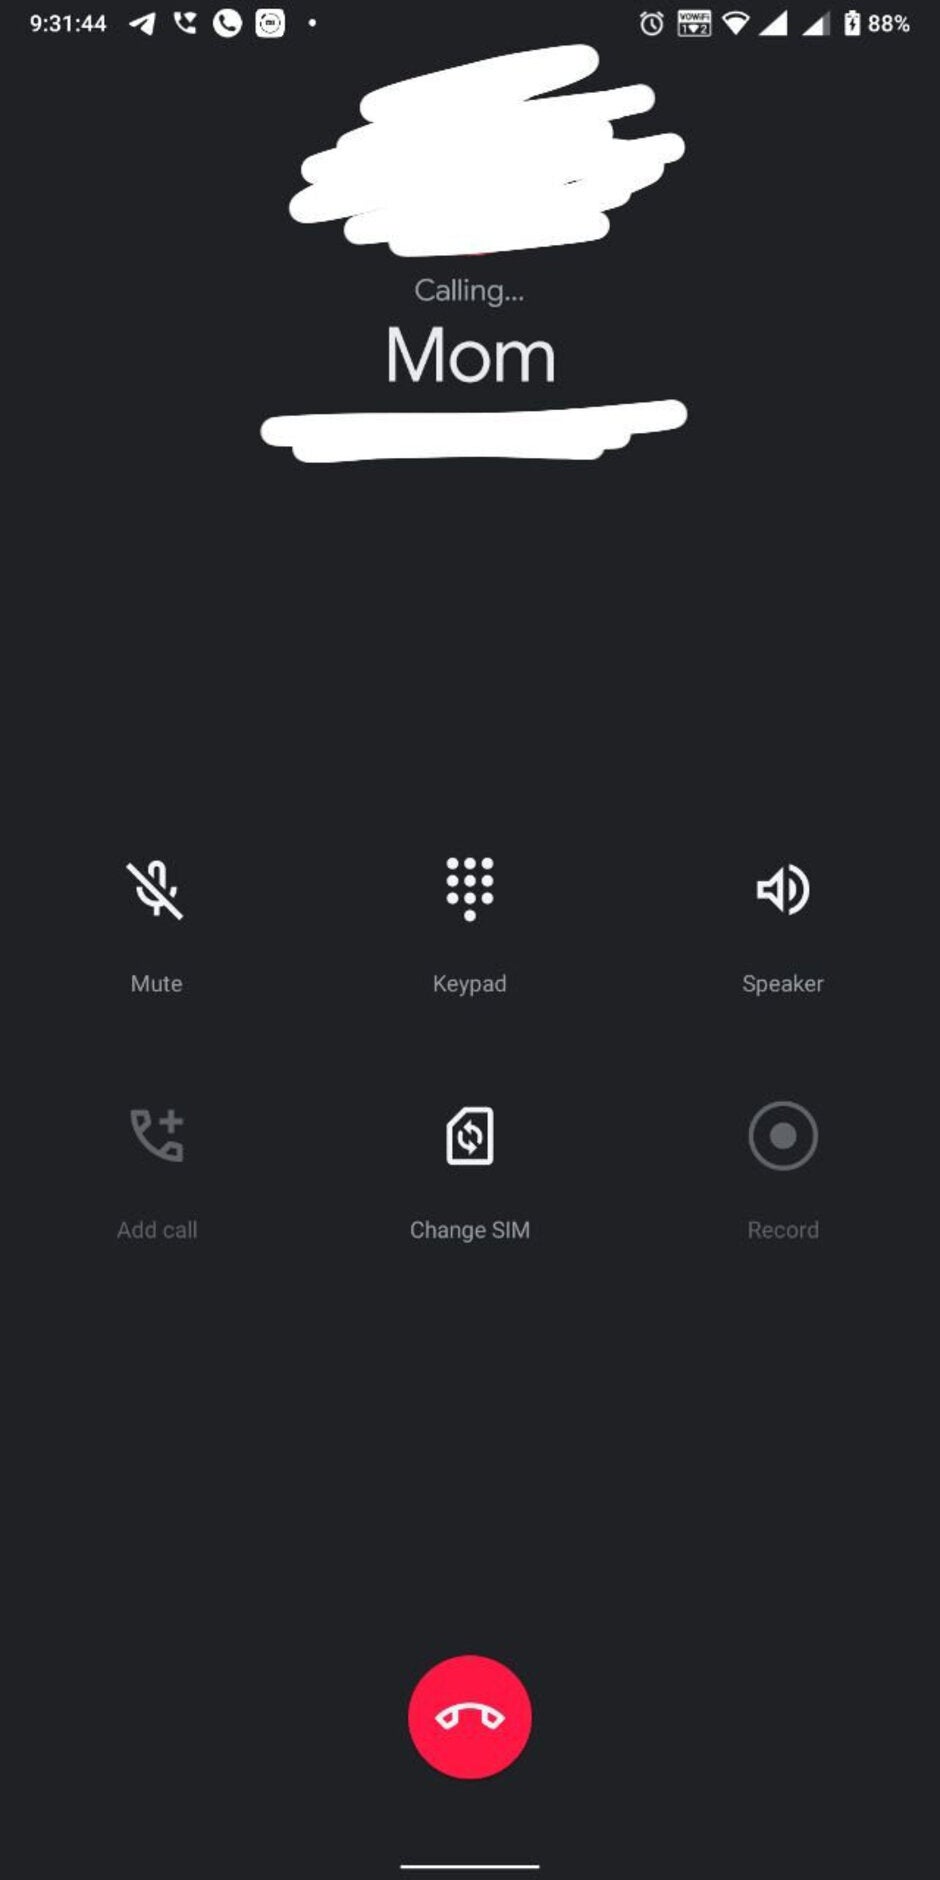 Google Phone call recording feature will be region restricted